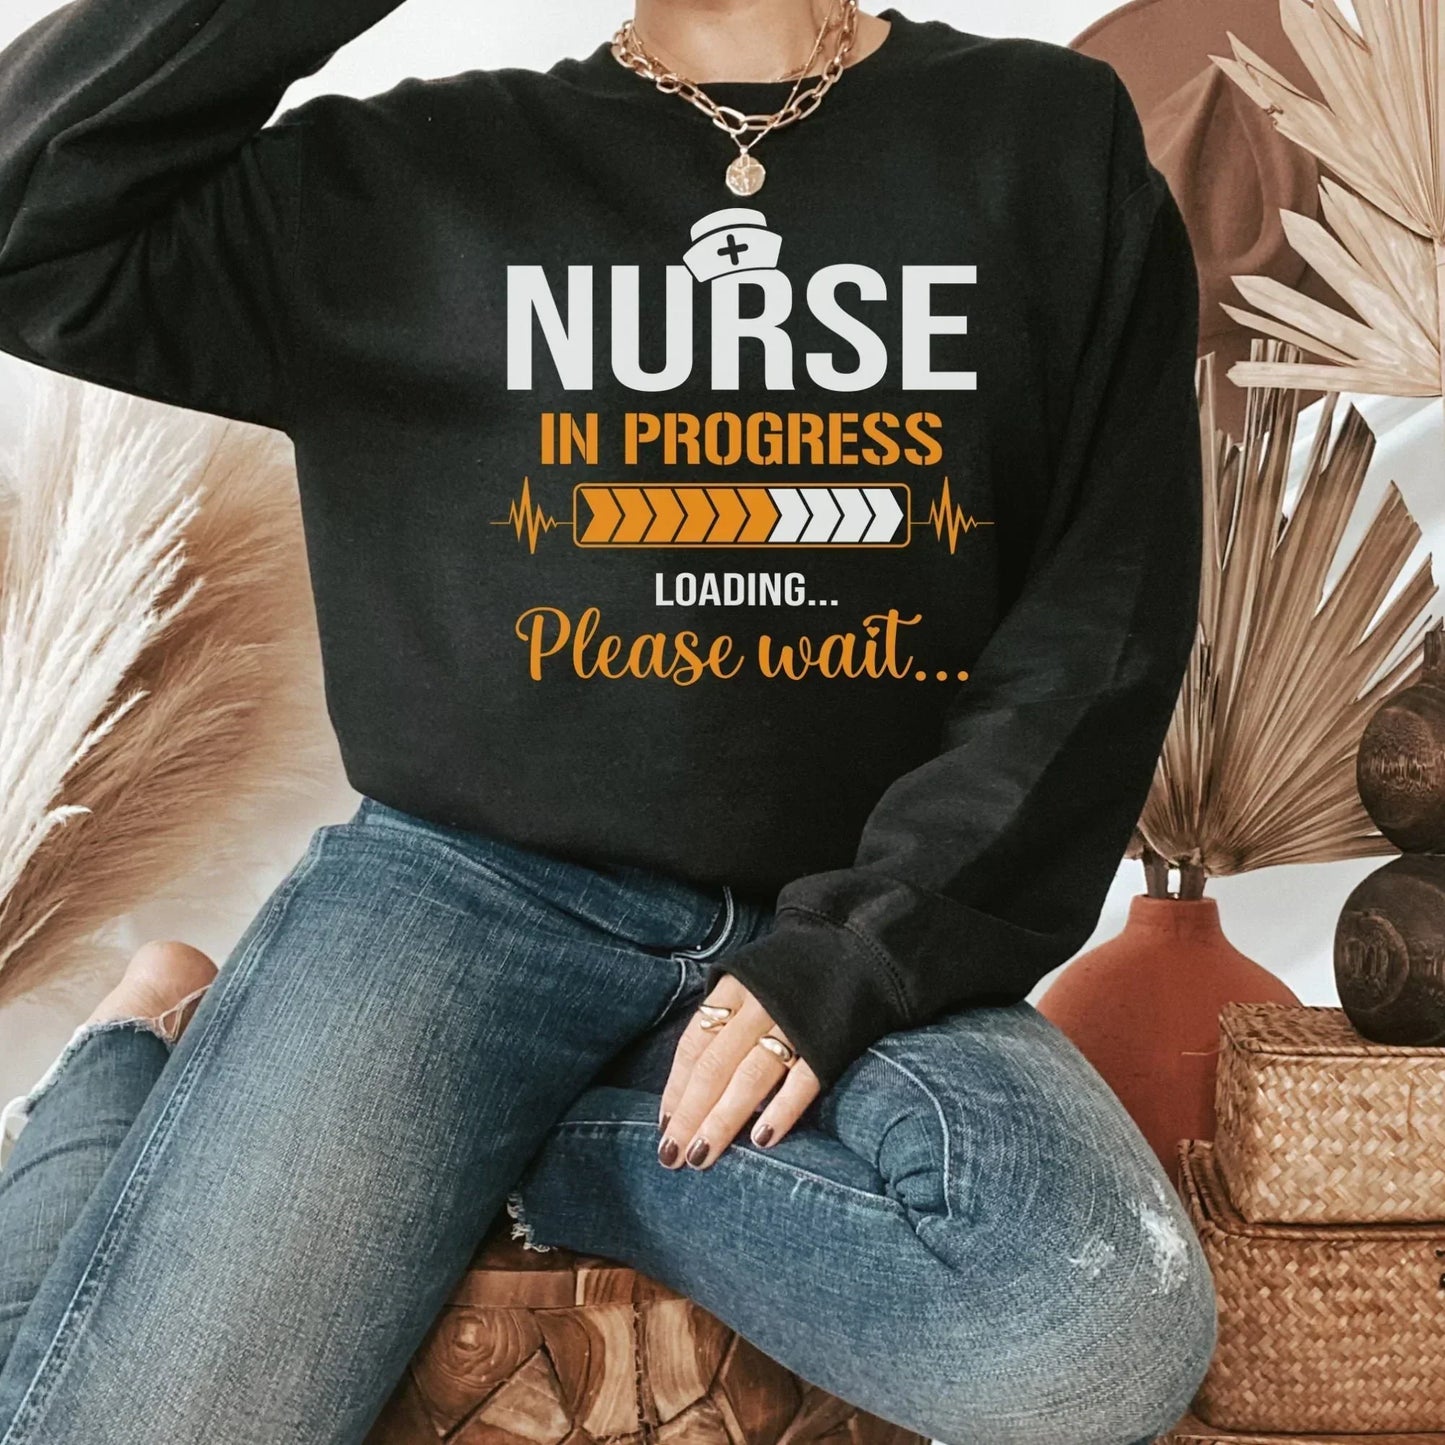 Nurse Student Shirt-Great for Students, Practitioners, New Grads, RN, ICU Oncology, Pediatric, ER, L&D, Retired Nurse Week Appreciation Gift